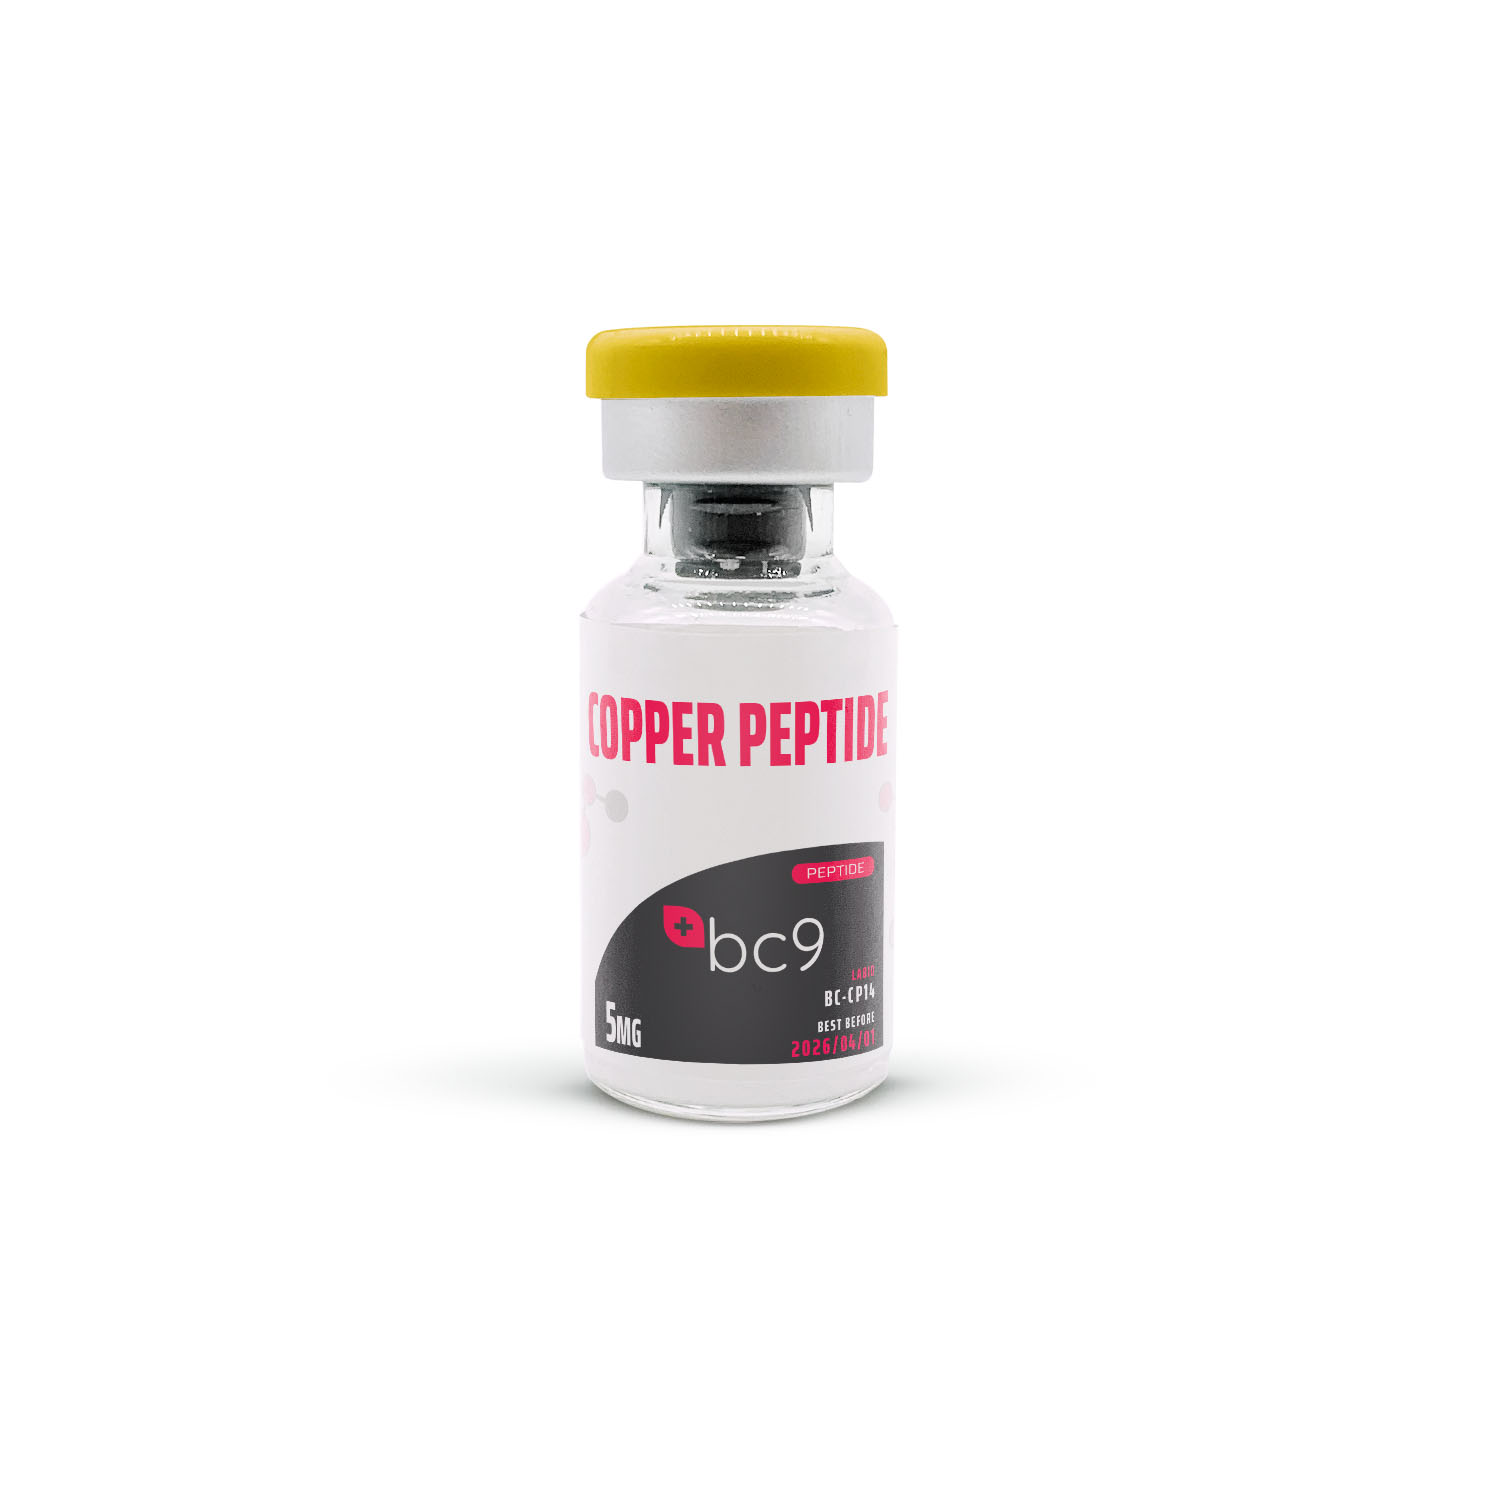 Copper Peptide for Sale | Fast Shipping | BC9.org